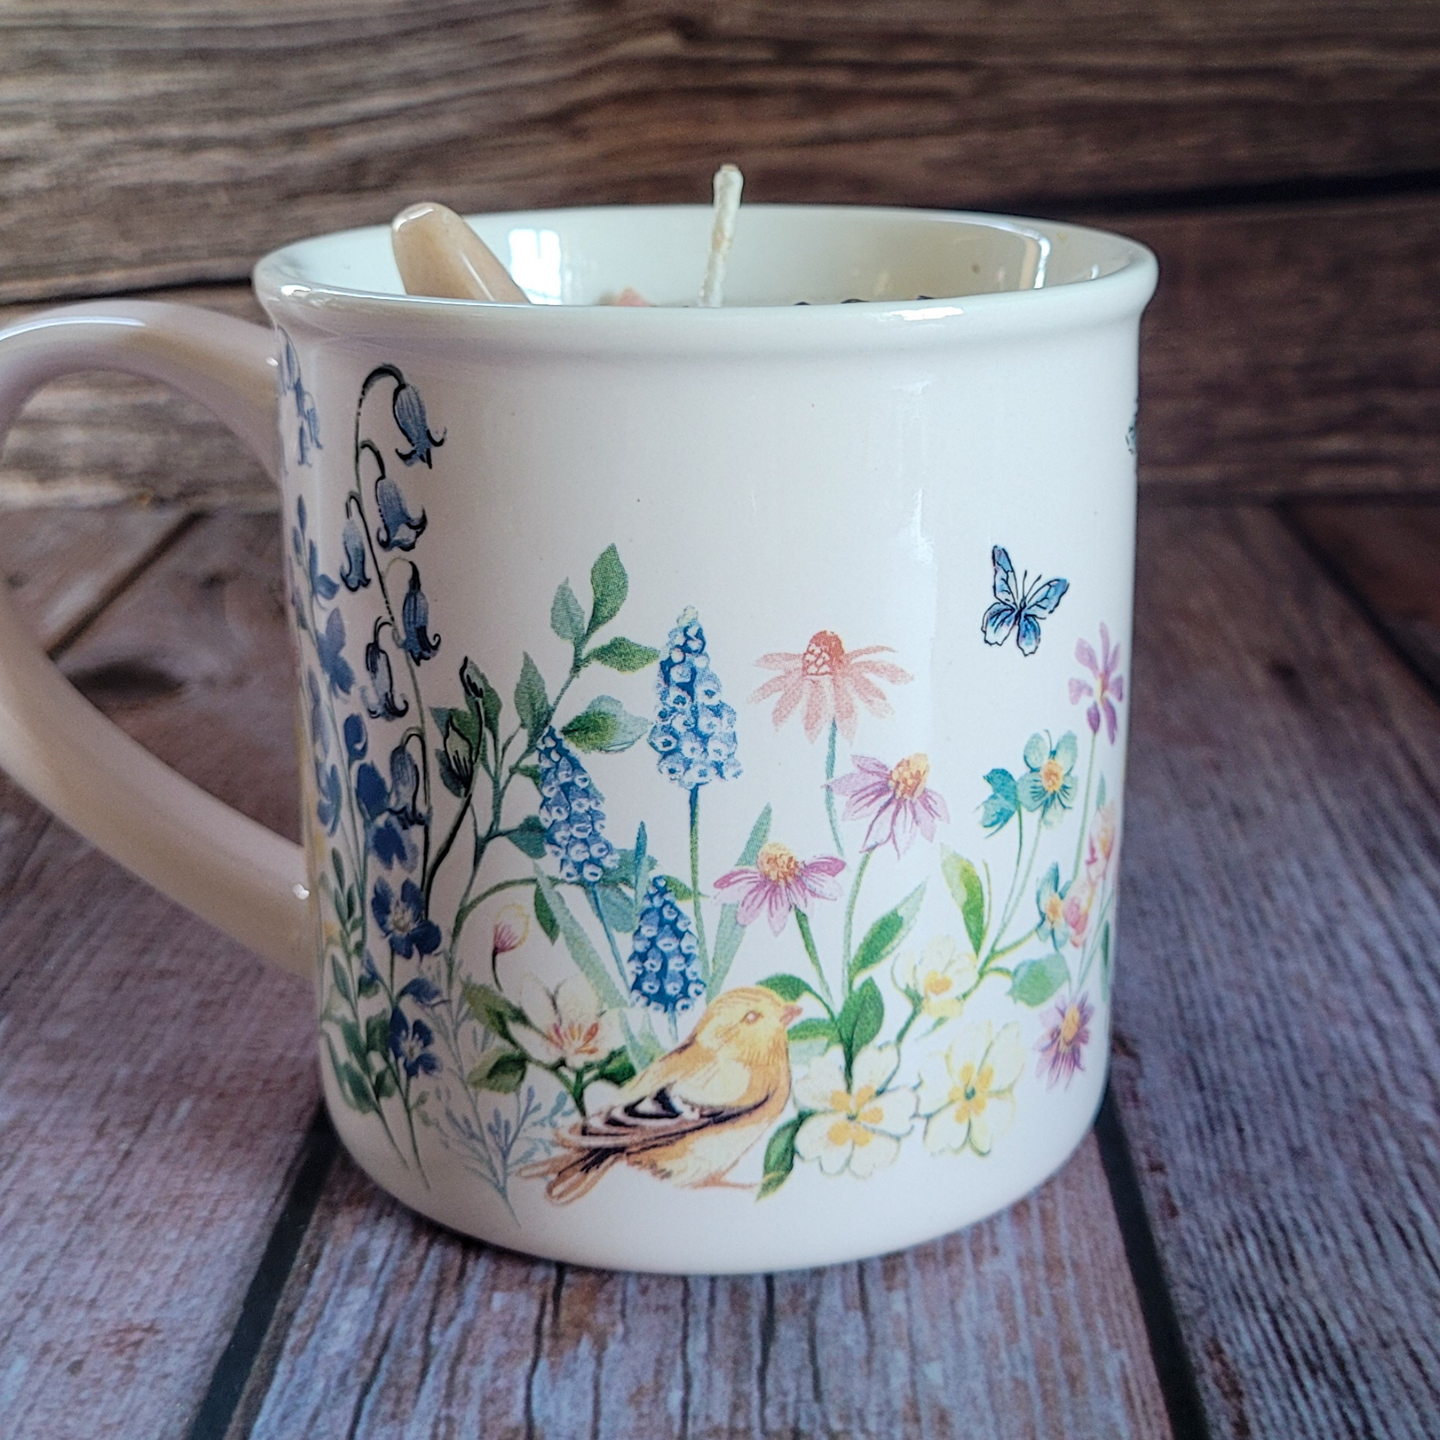 Lily Forest Coffee Cup Candle | Garden Scene Cup